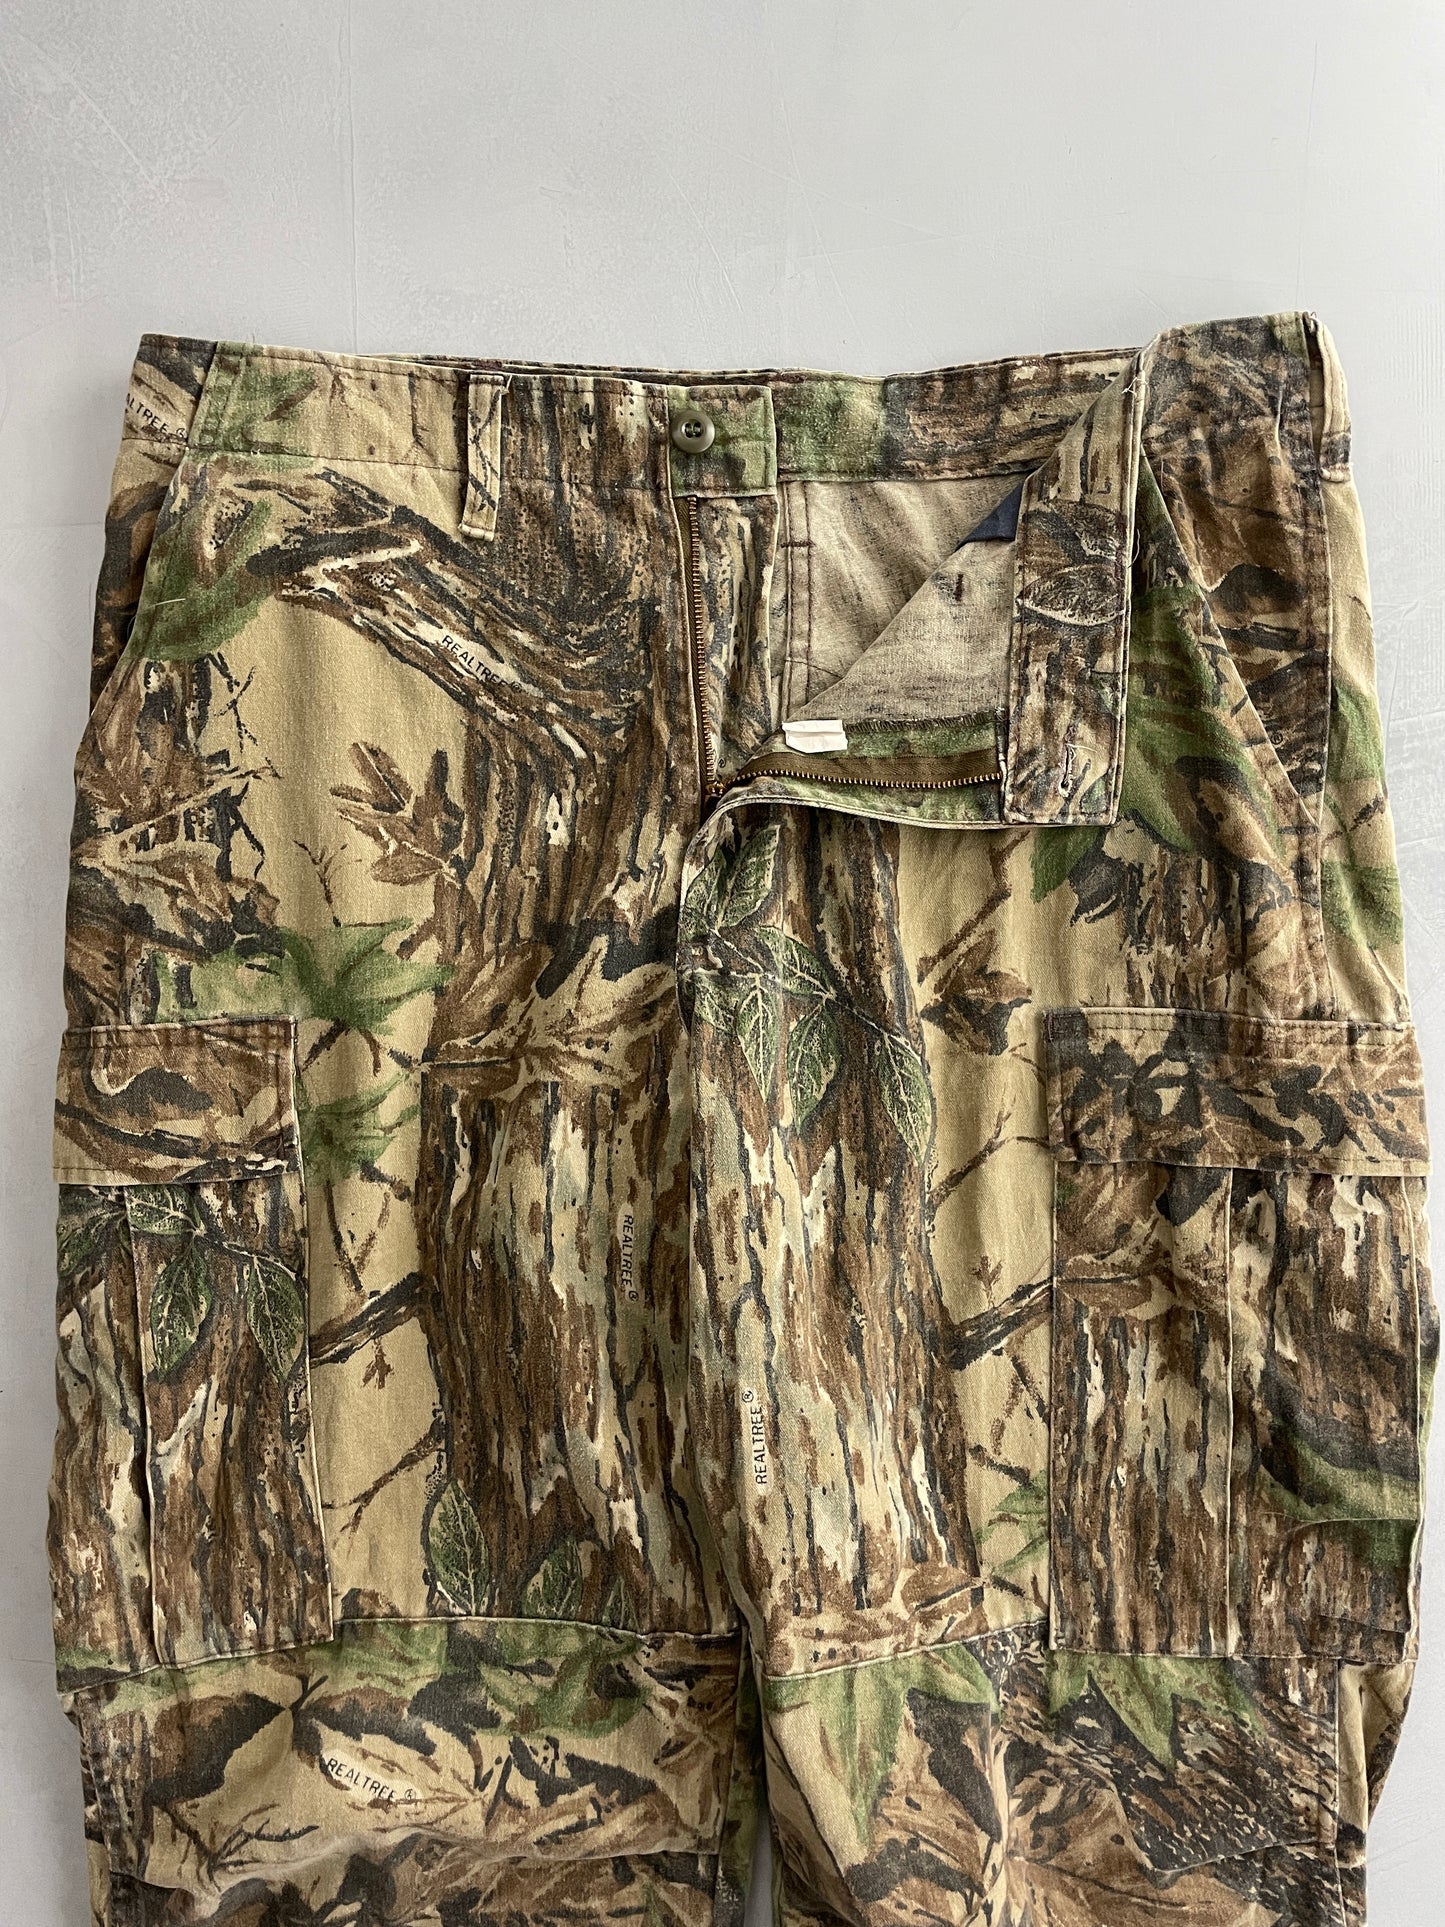 Cabella's Real Tree Cargo Pants [39"]